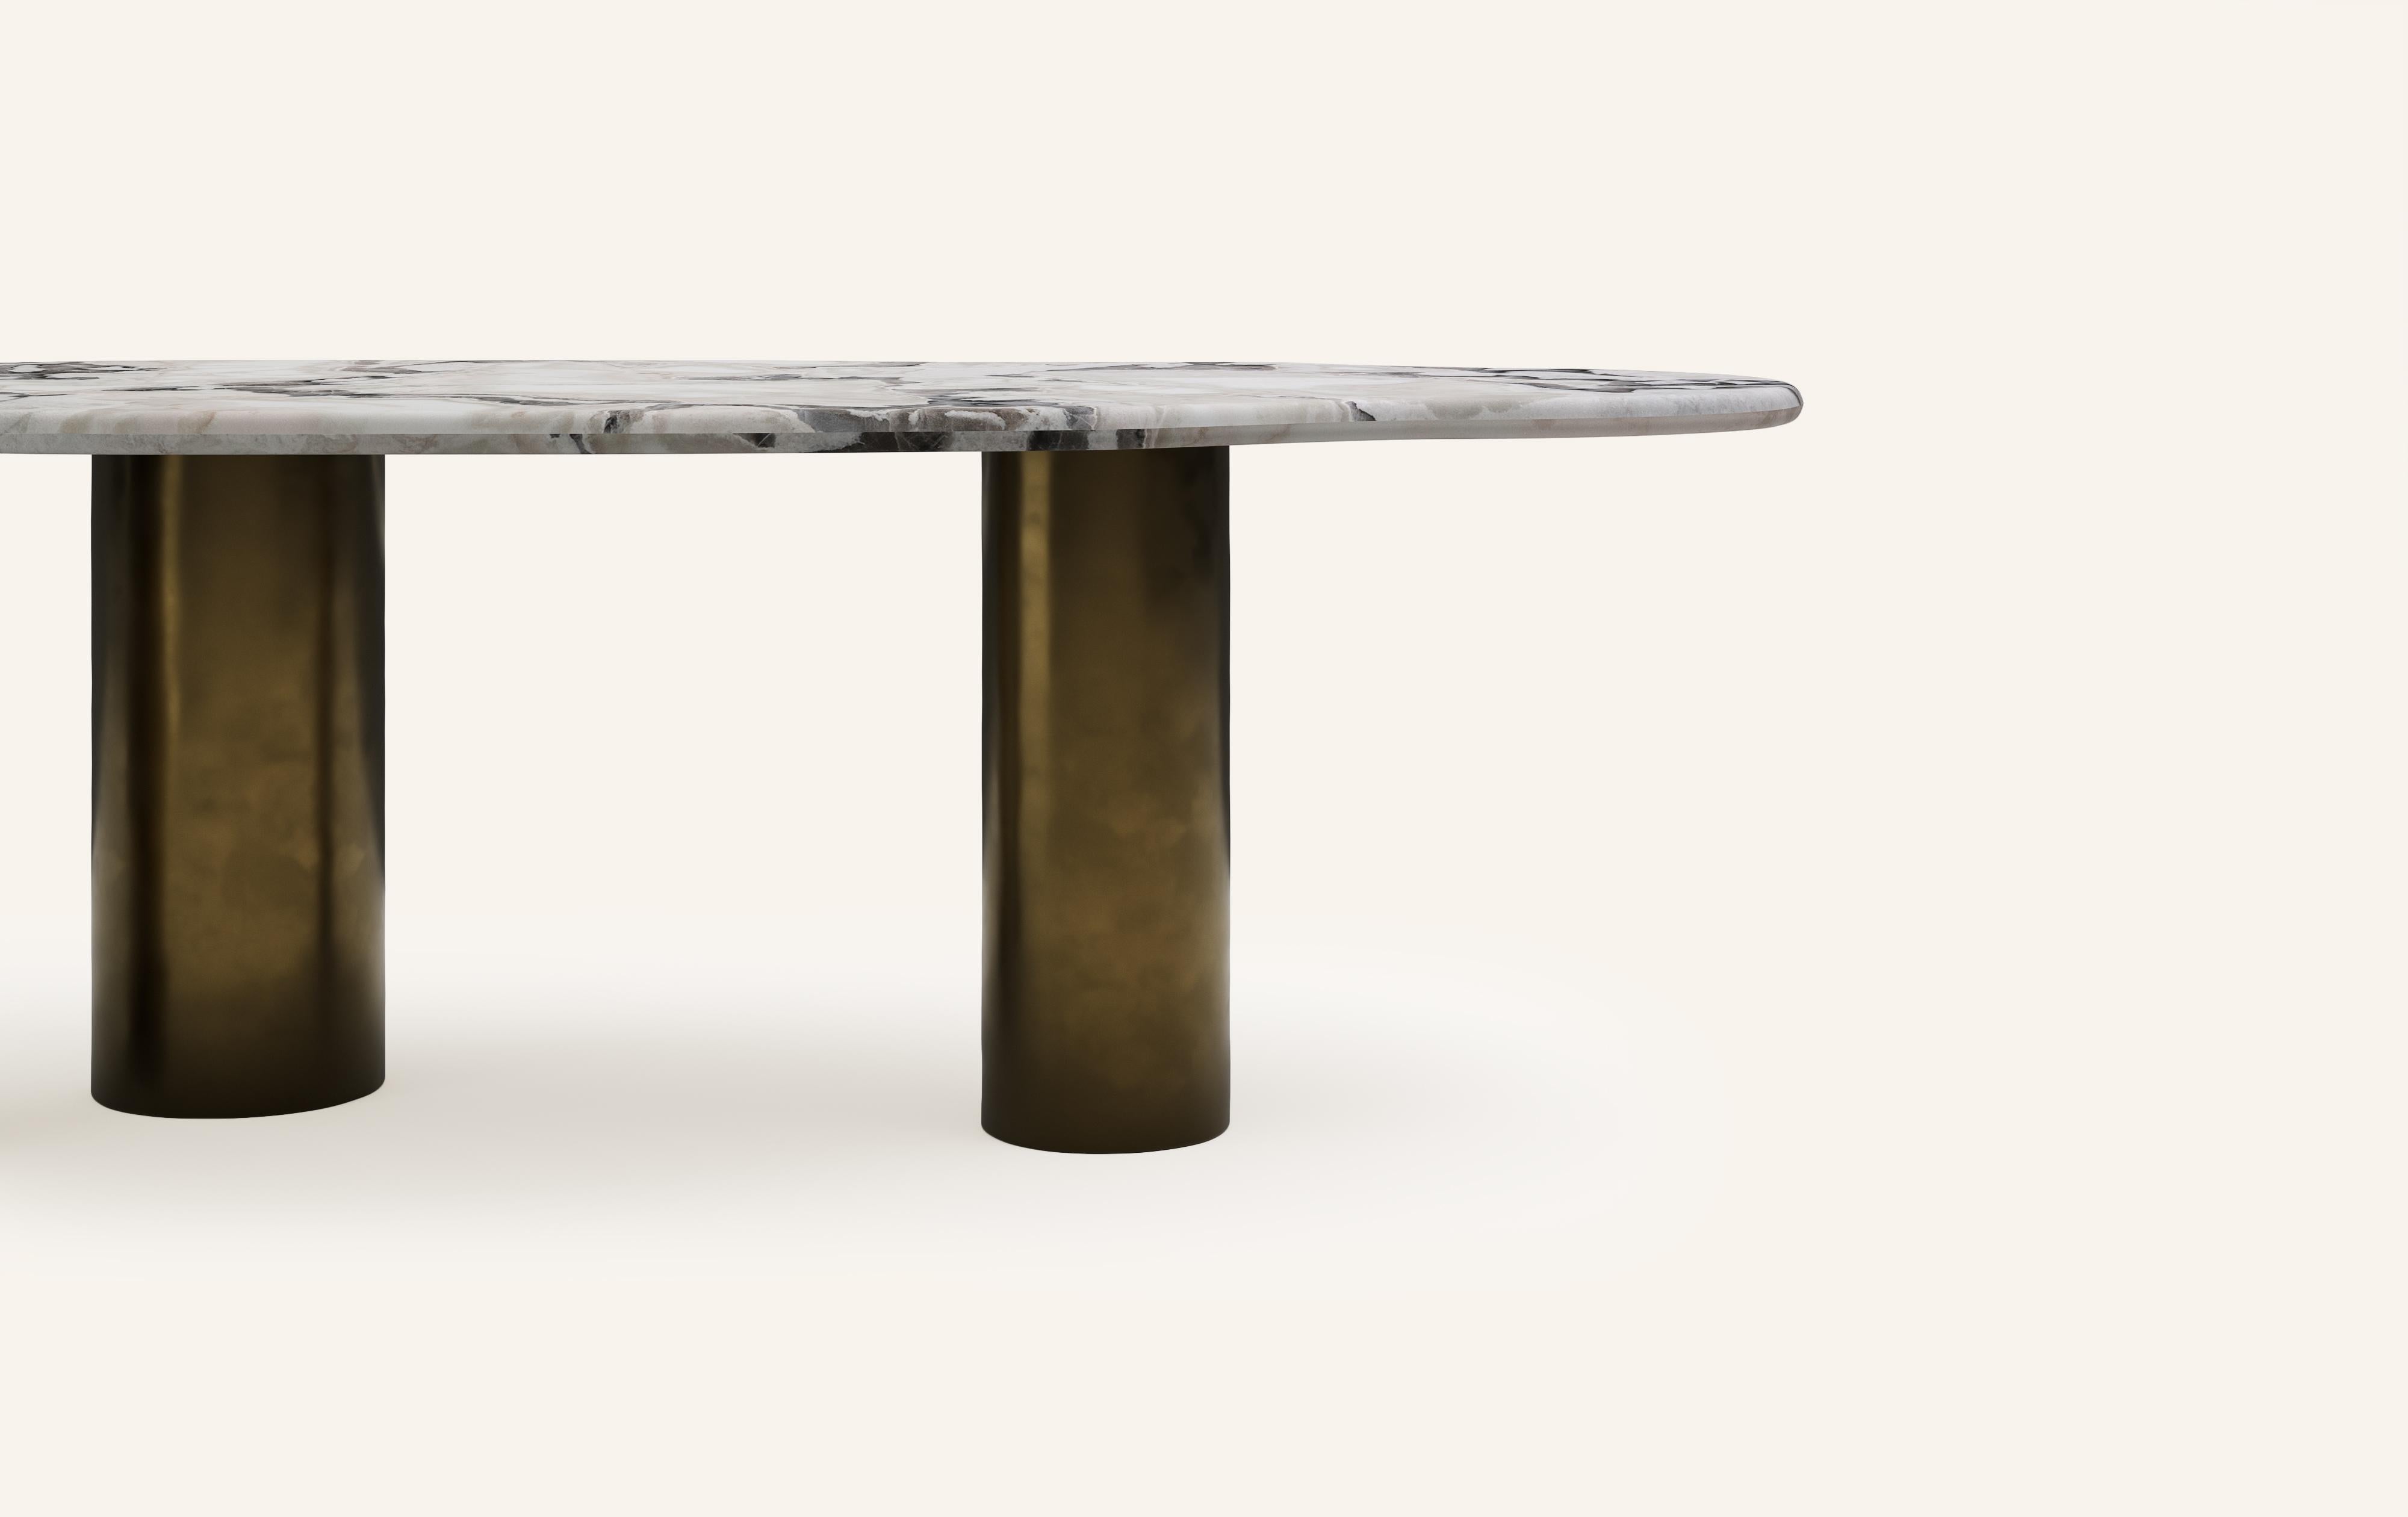 American FORM(LA) Lago Freeform Dining Table 108”L x 48”W x 30”H Oyster Marble & Bronze For Sale